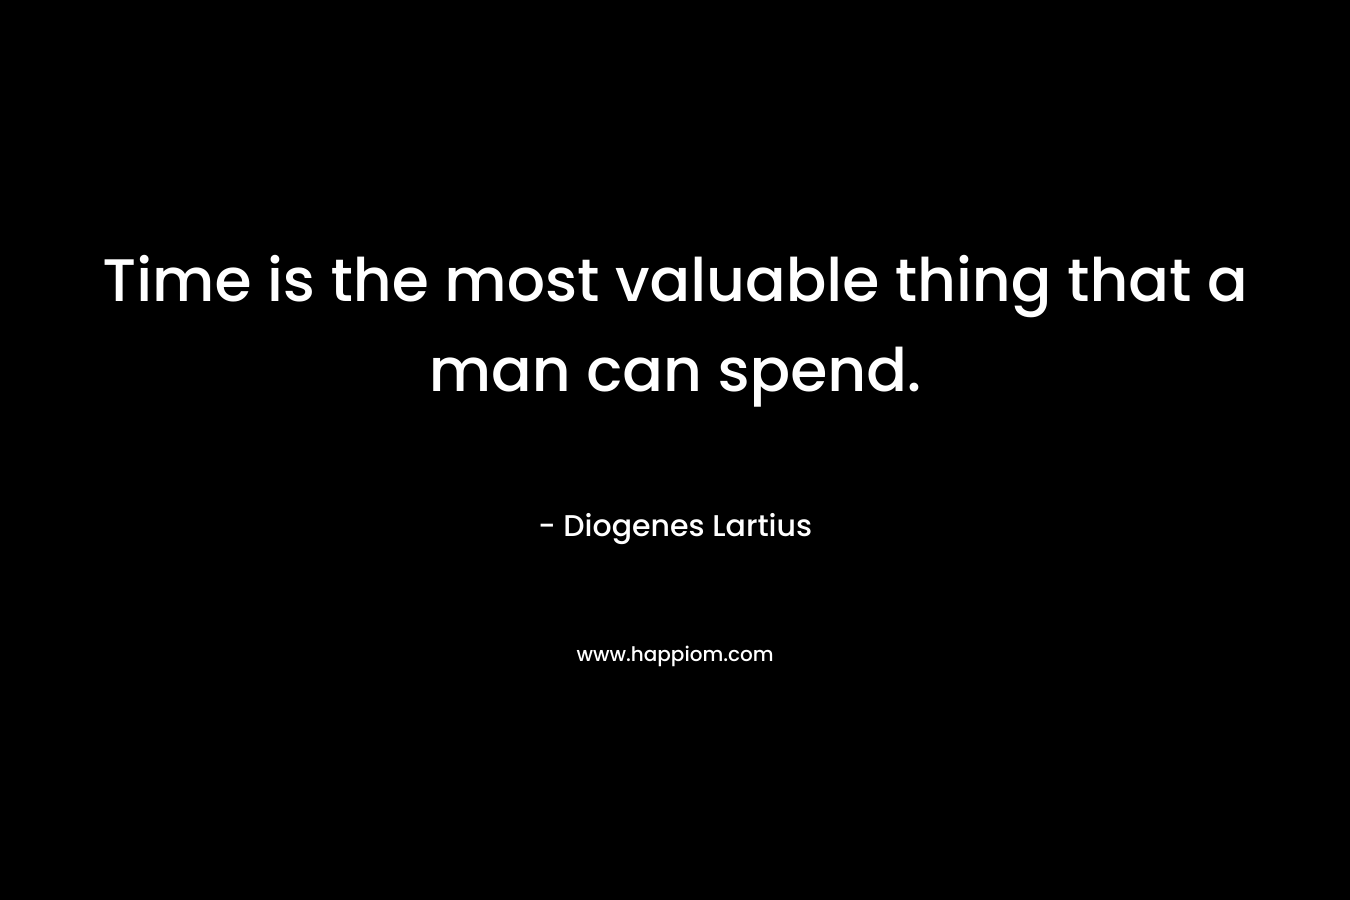 Time is the most valuable thing that a man can spend.